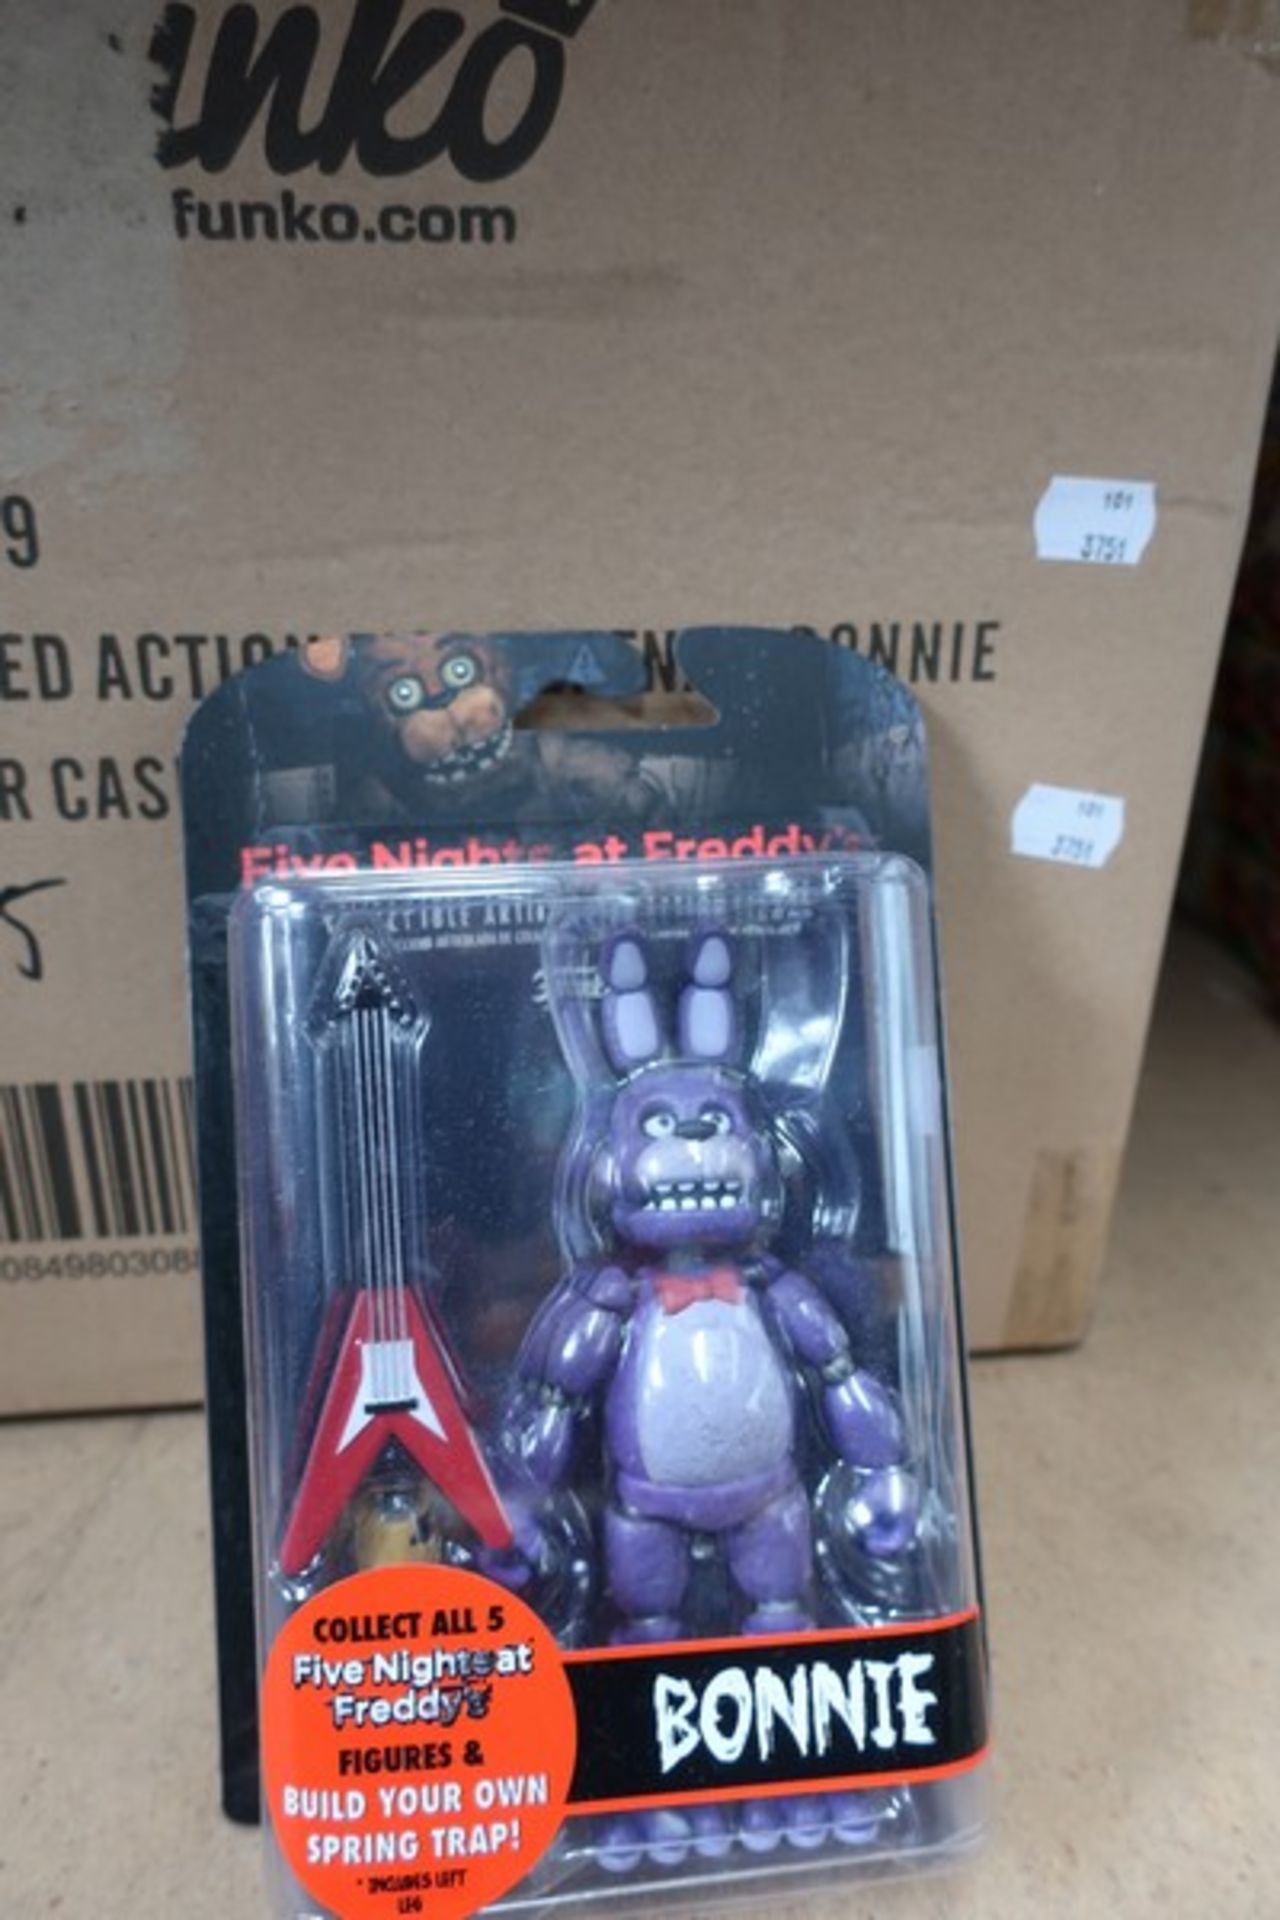 A quantity of Five Night's at Freddy's Bonnie Funko figures (24 items).